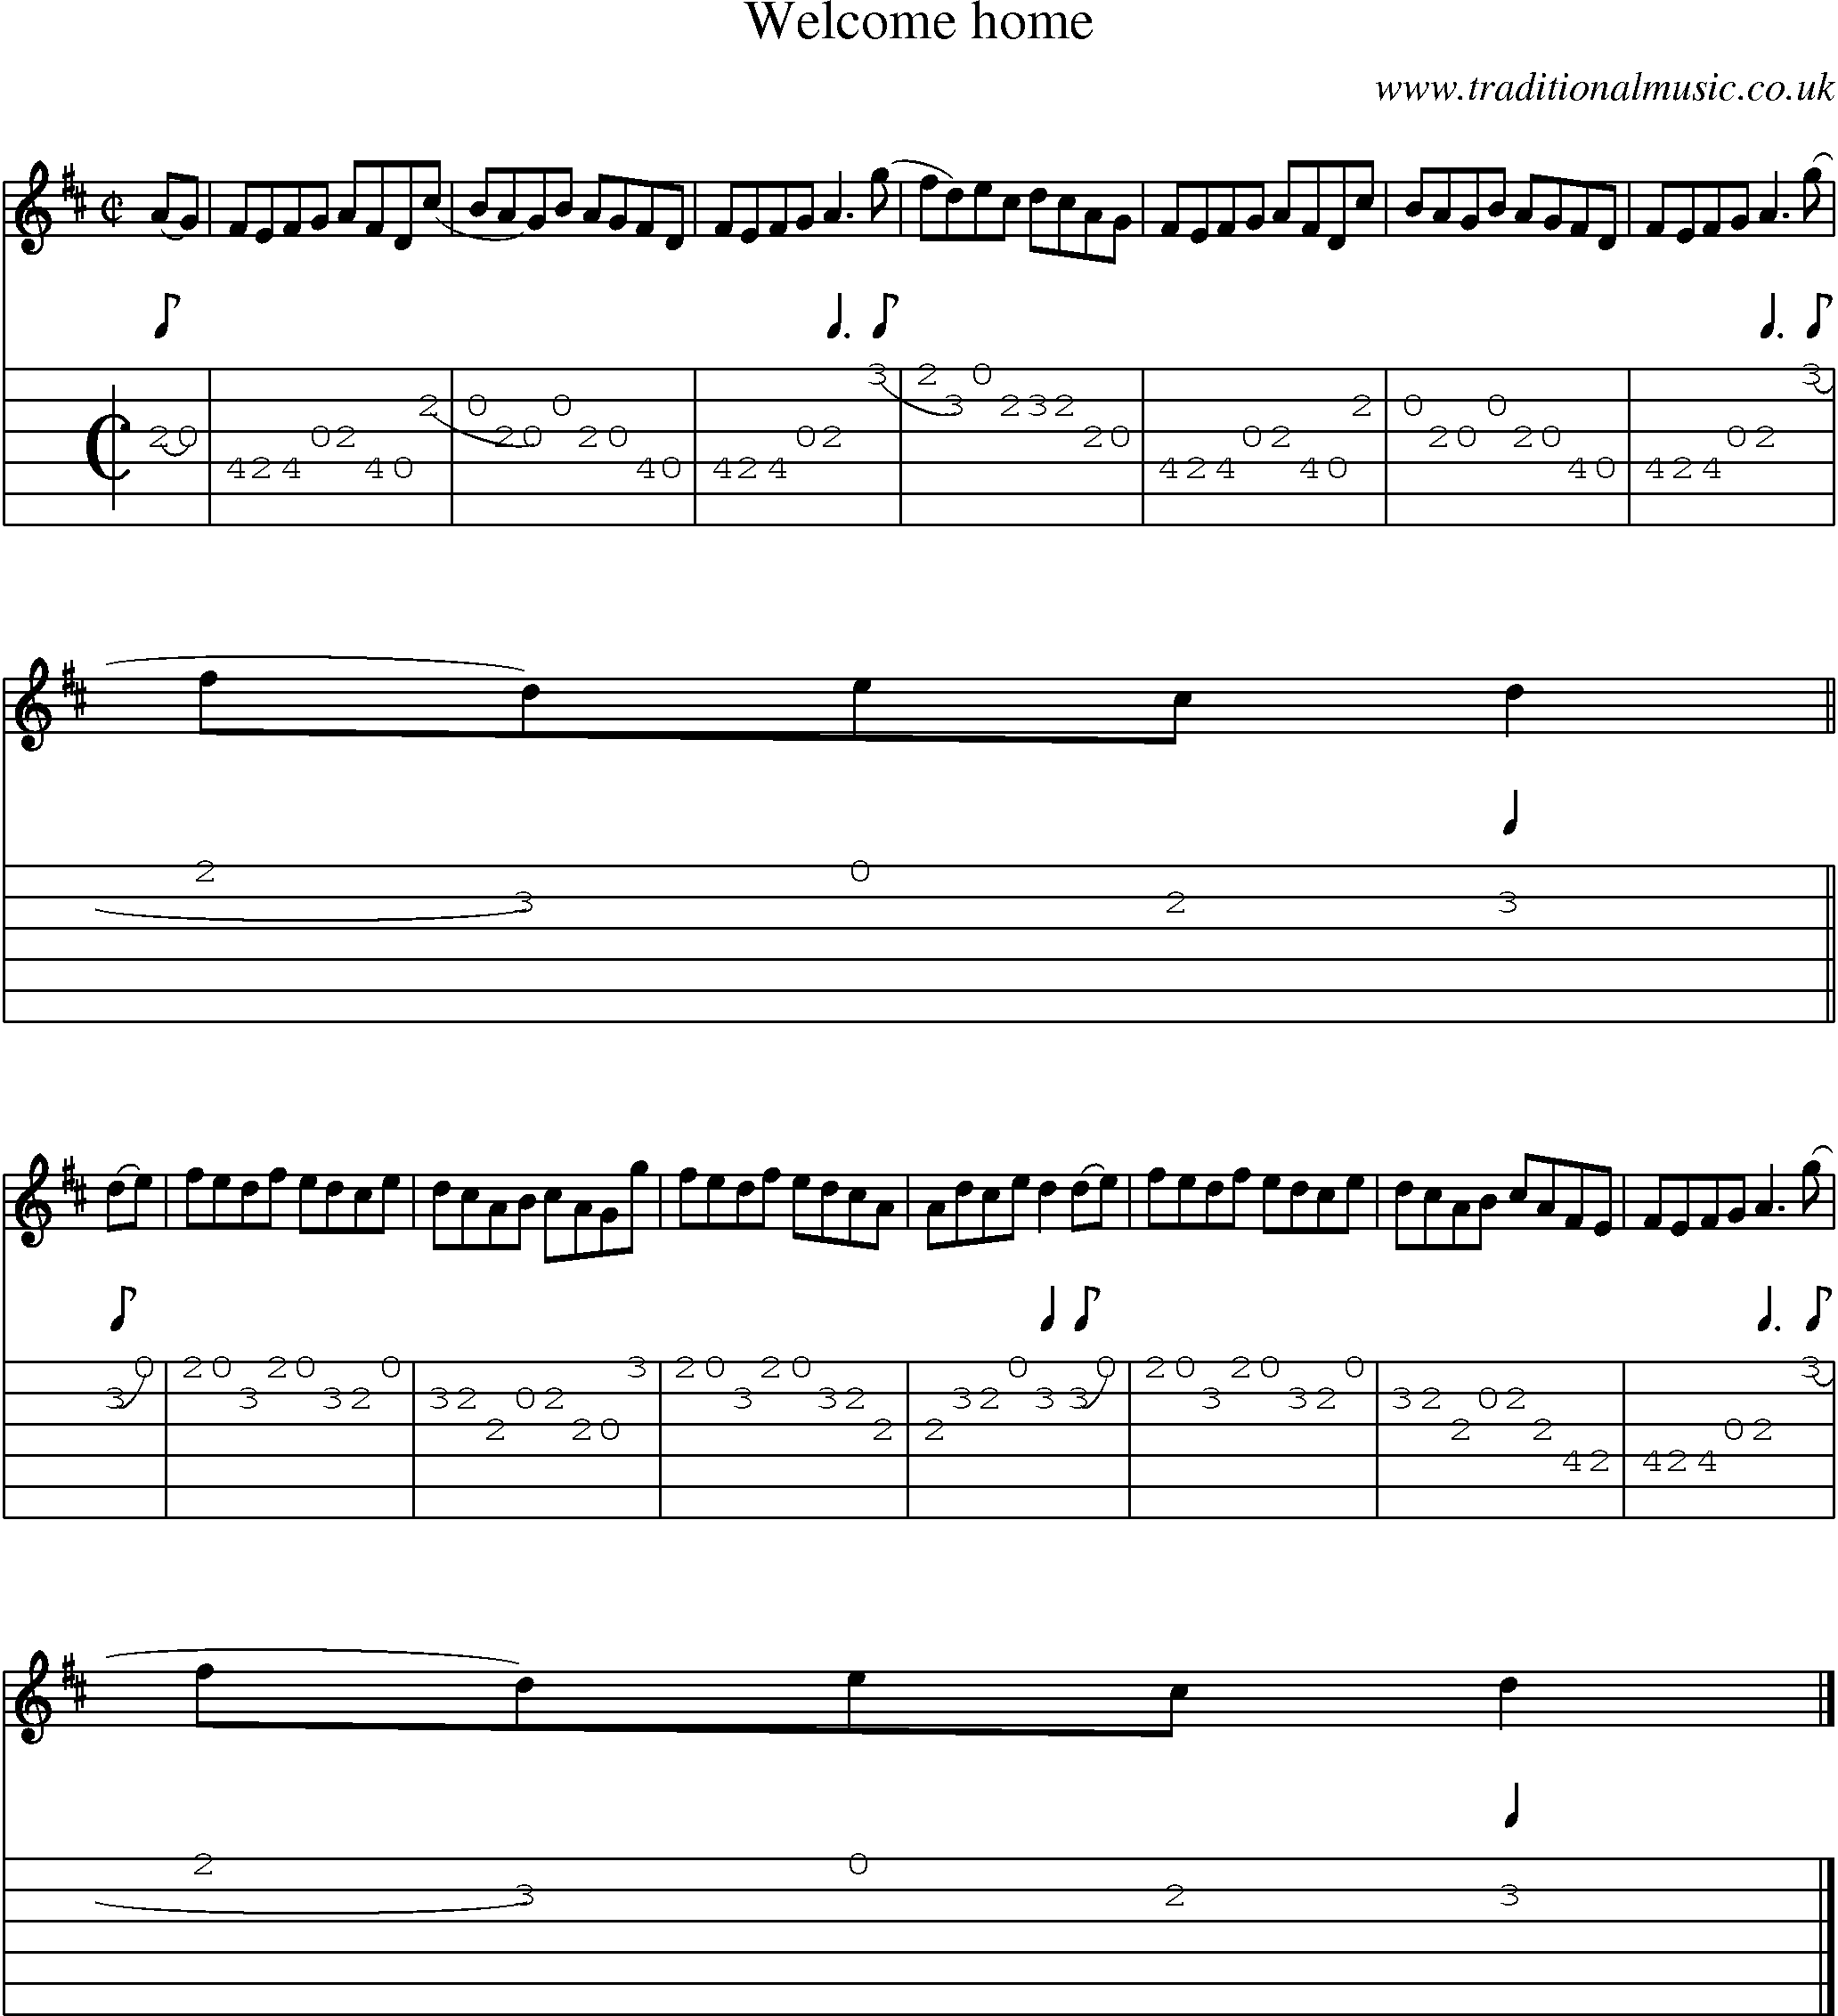 Music Score and Guitar Tabs for Welcome Home